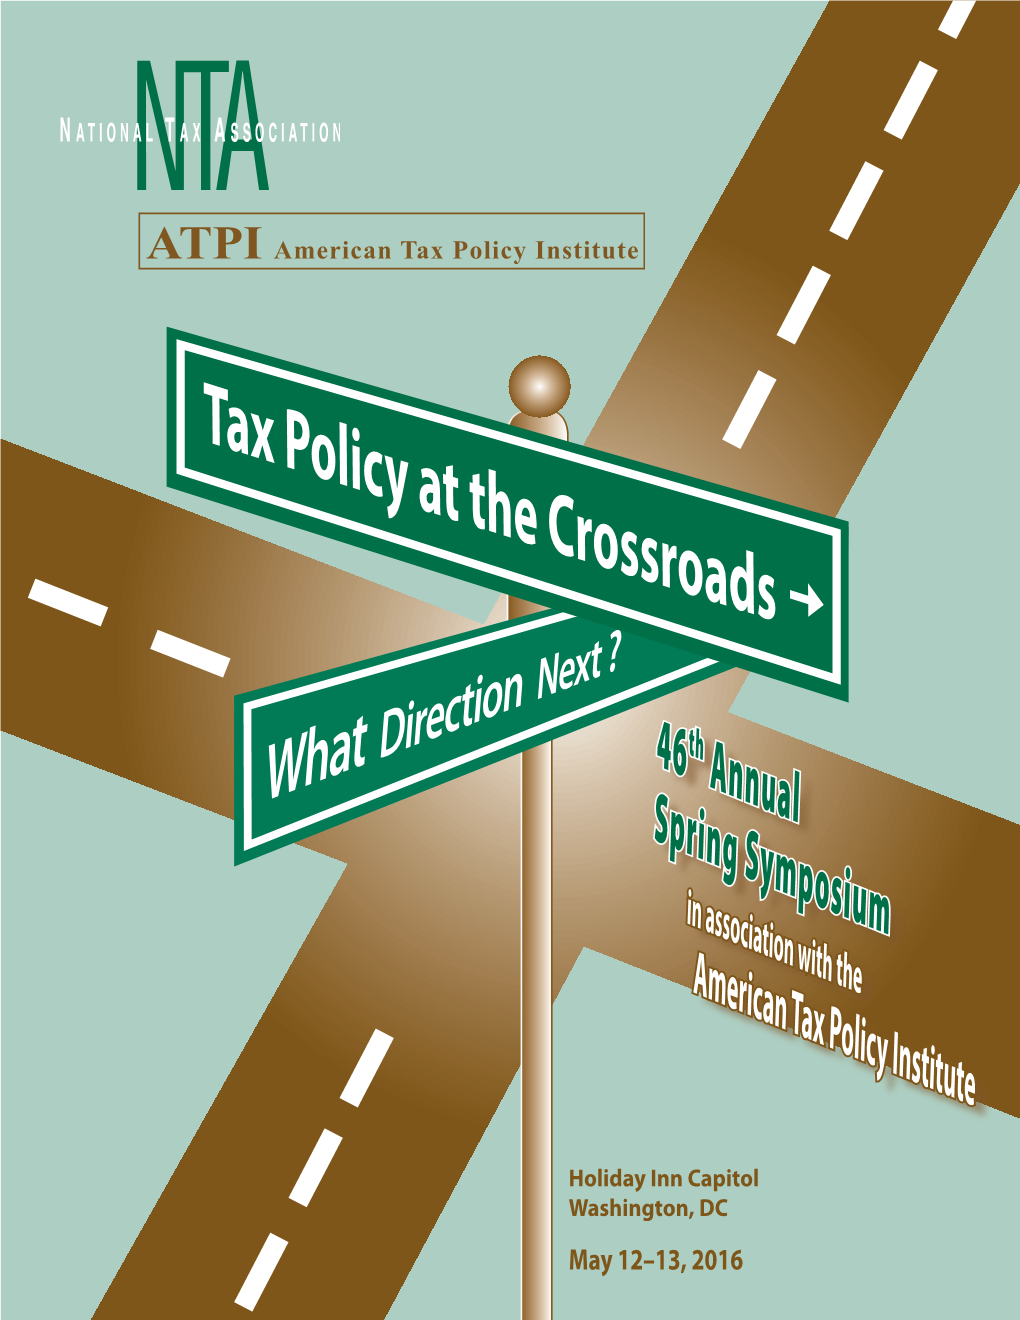 Tax Policy at the Crossroads →